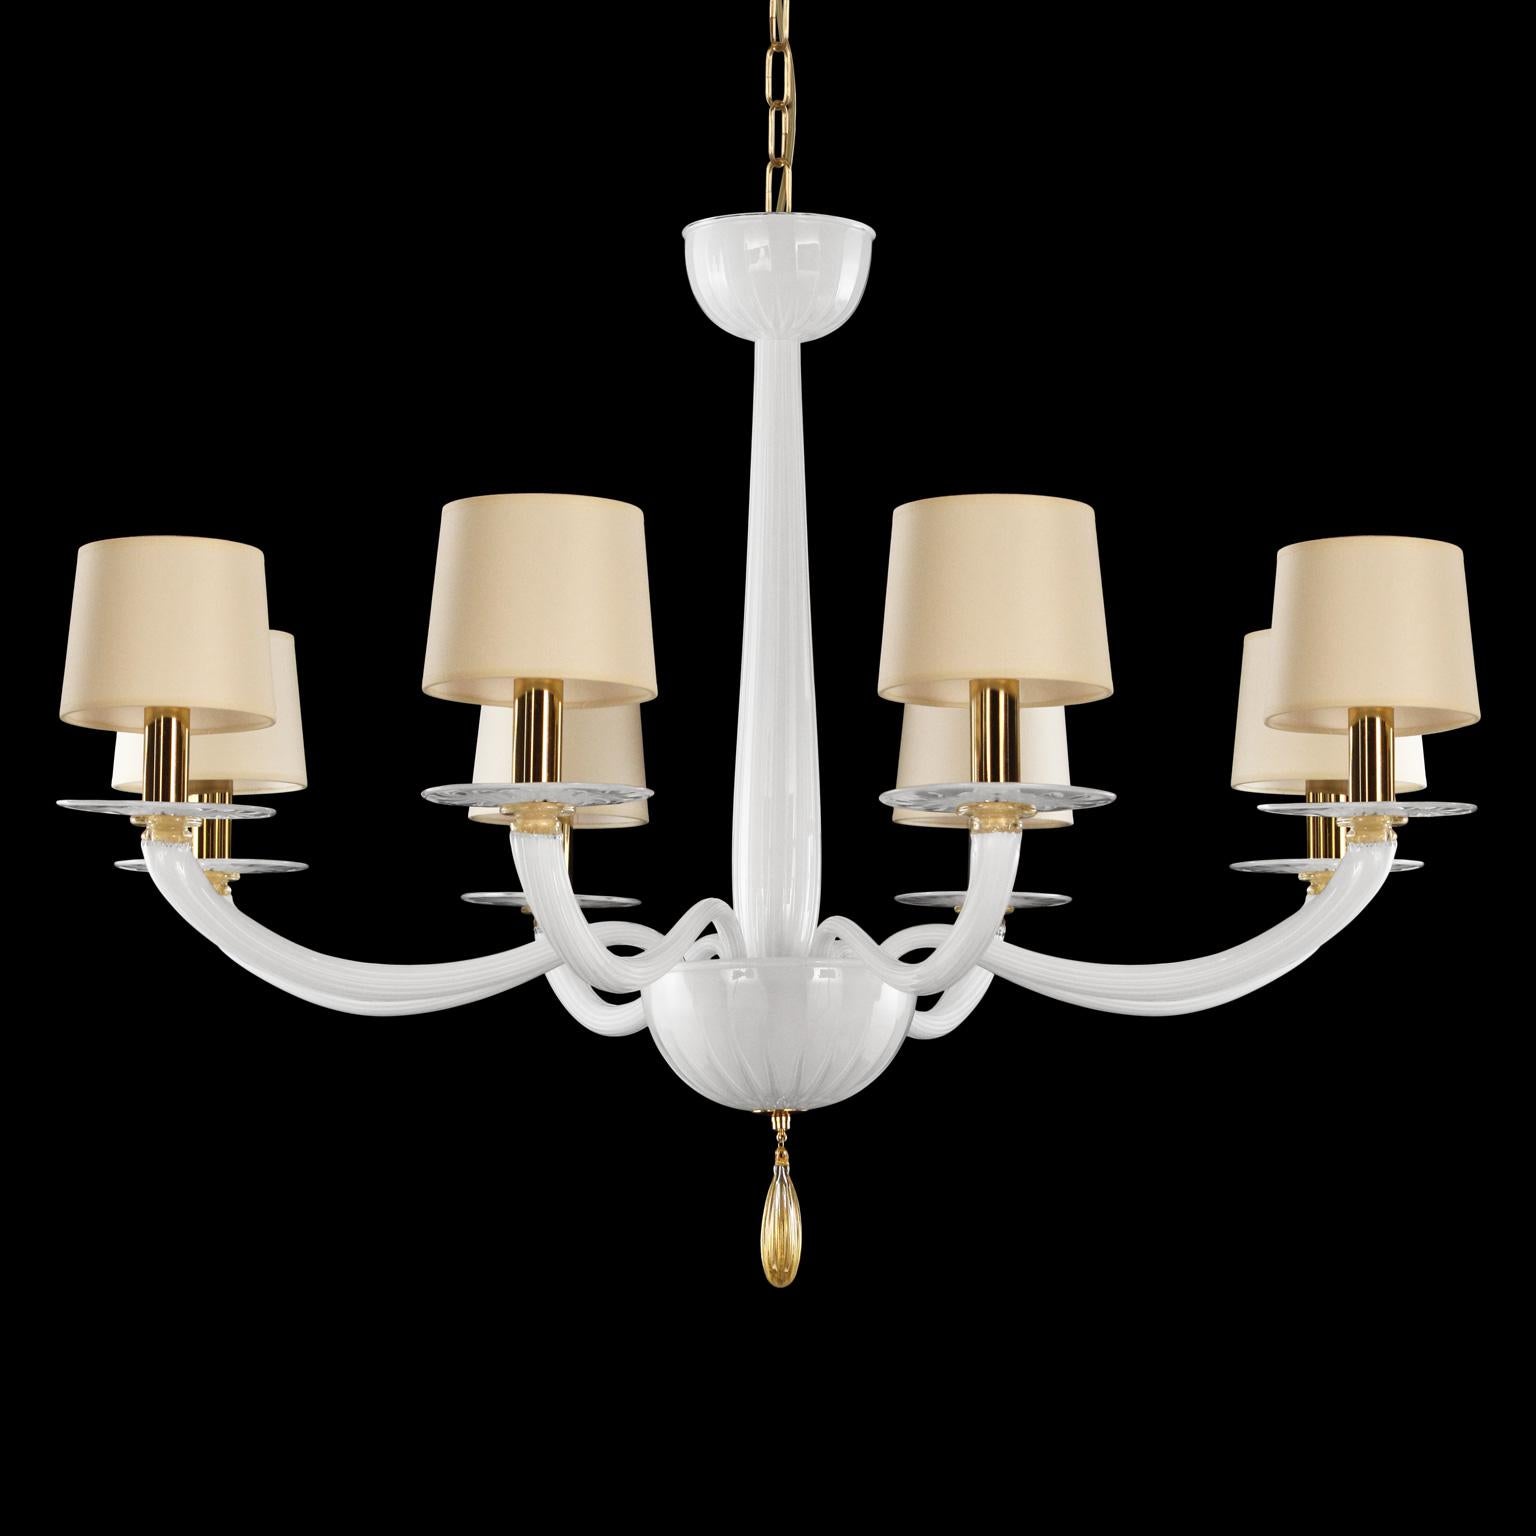 Serenade chandelier 8 lights white Murano glass, golden details ivory cotton lampshades by Multiforme
Serenade collection is inspired by a contemporary and international design, simple but not banal, and consists of elements studied in minute